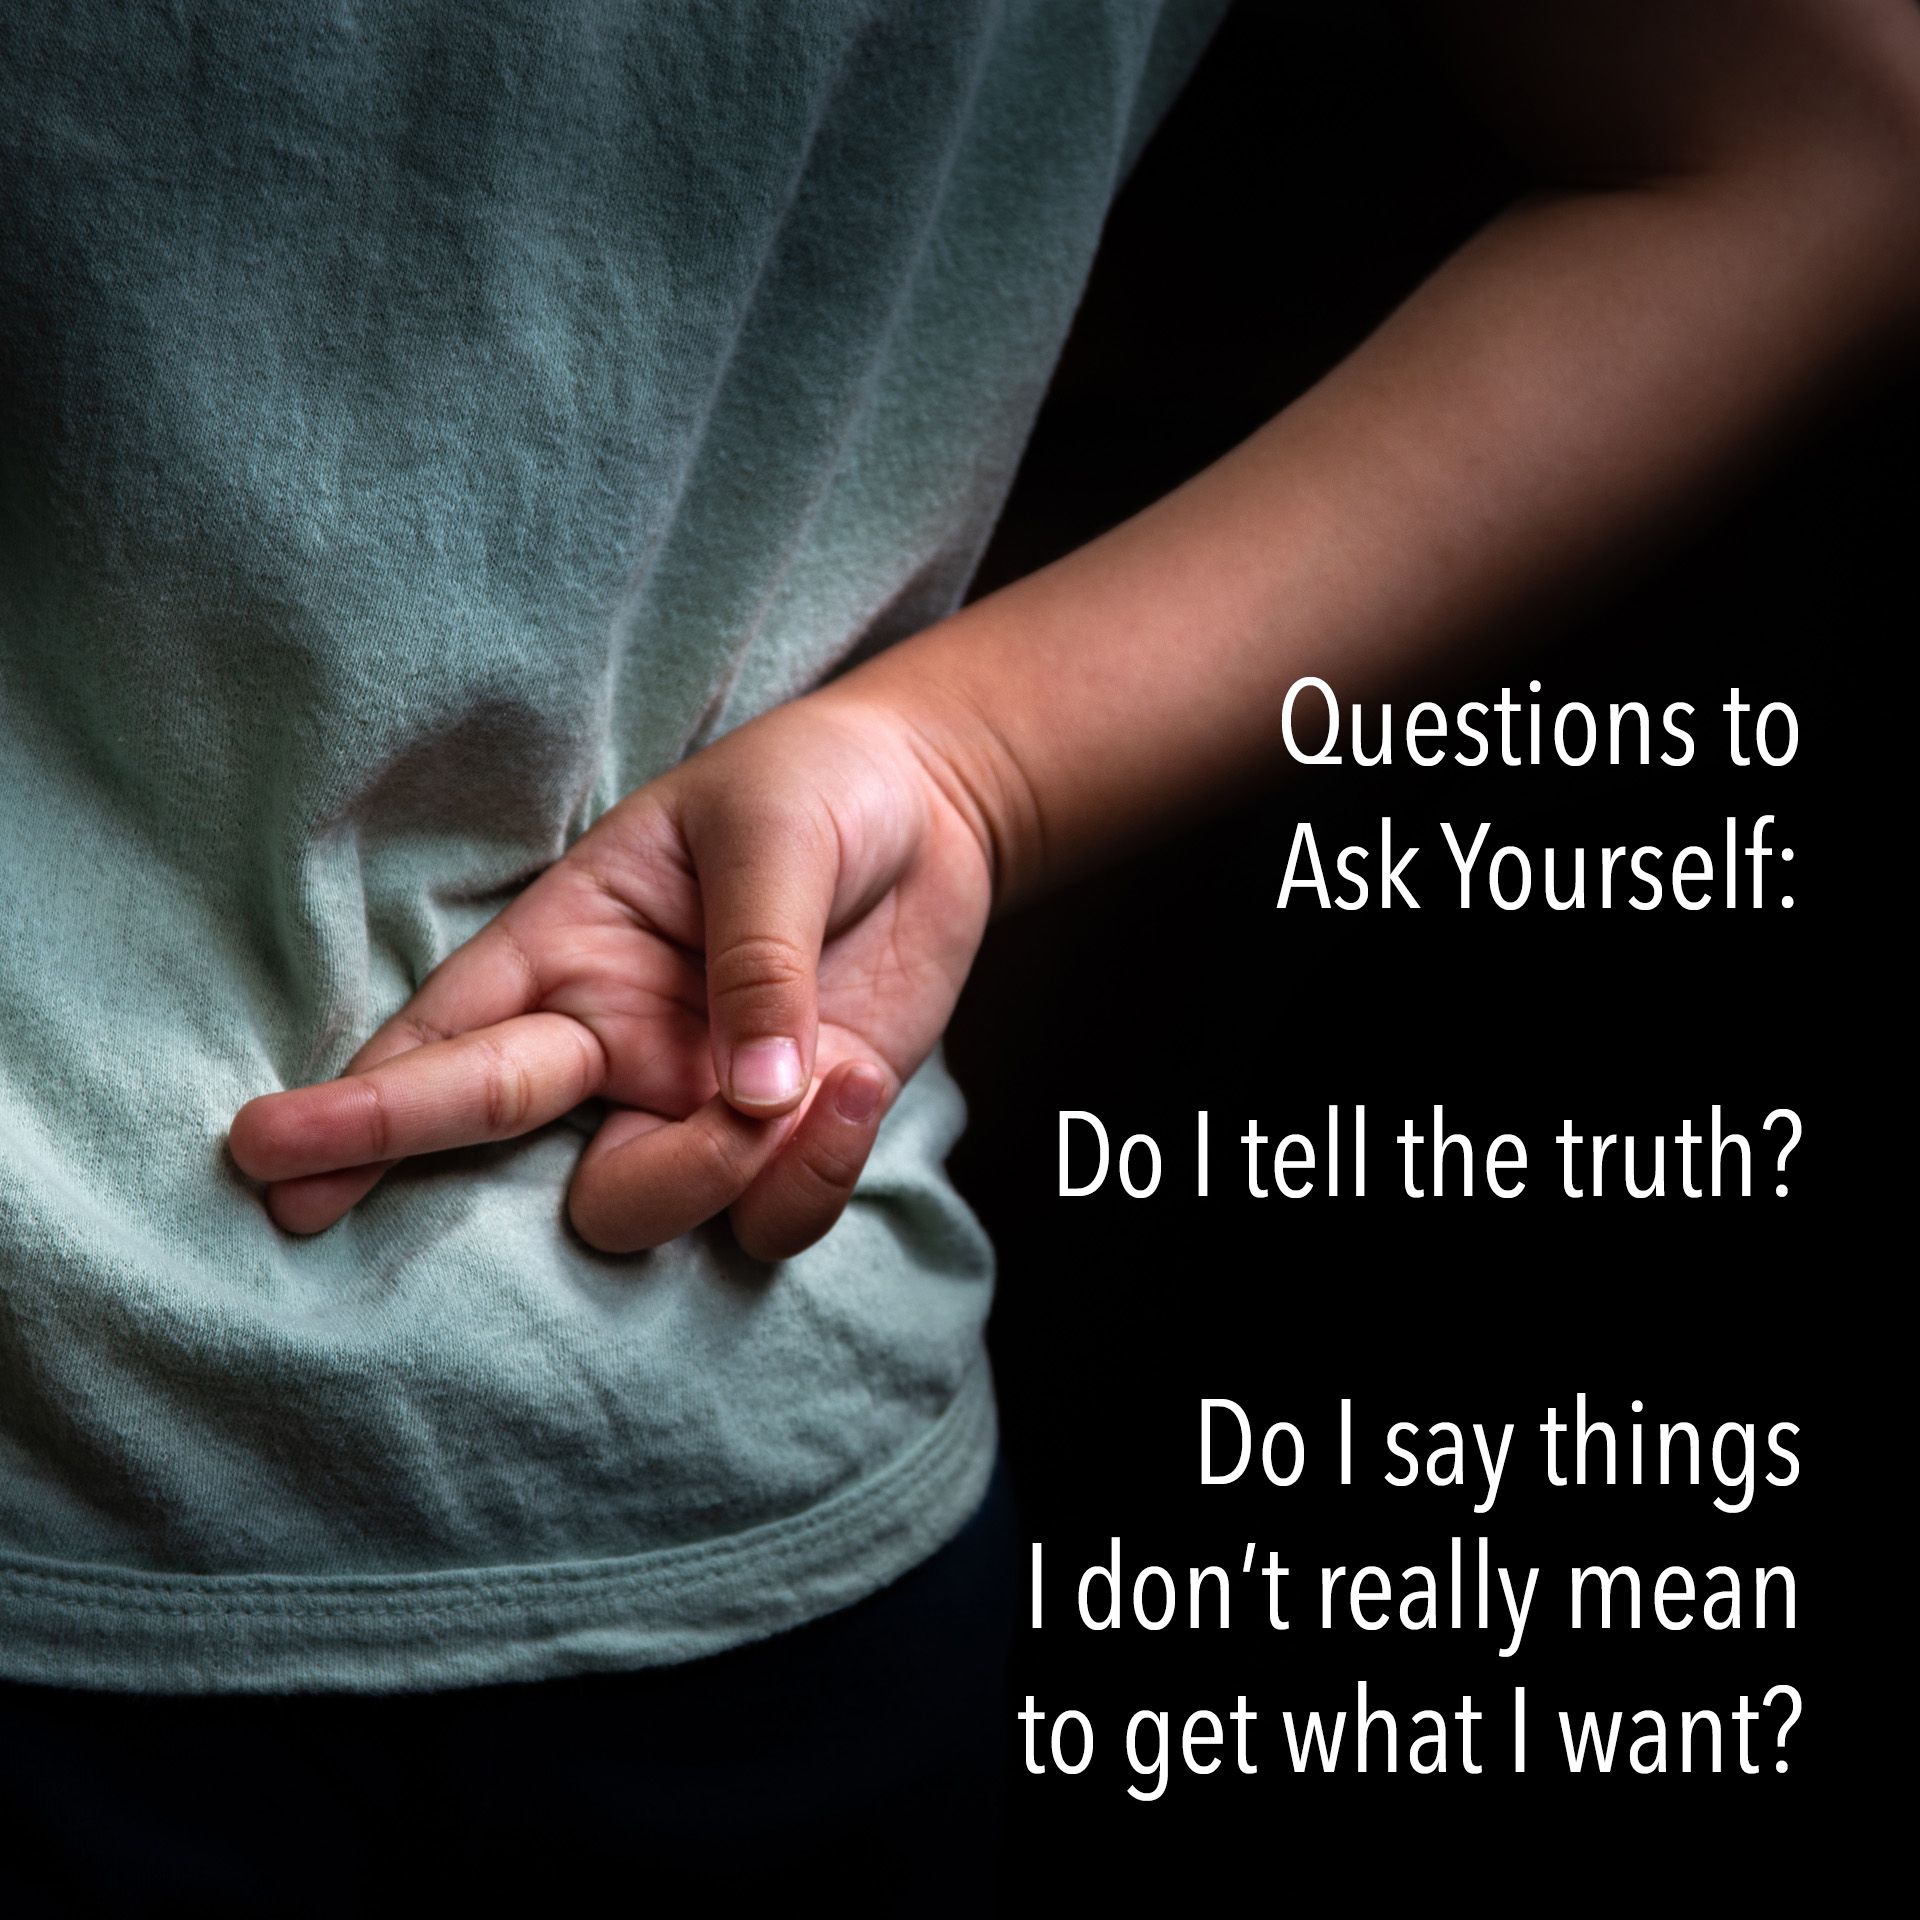 Questions to Ask Yourself!